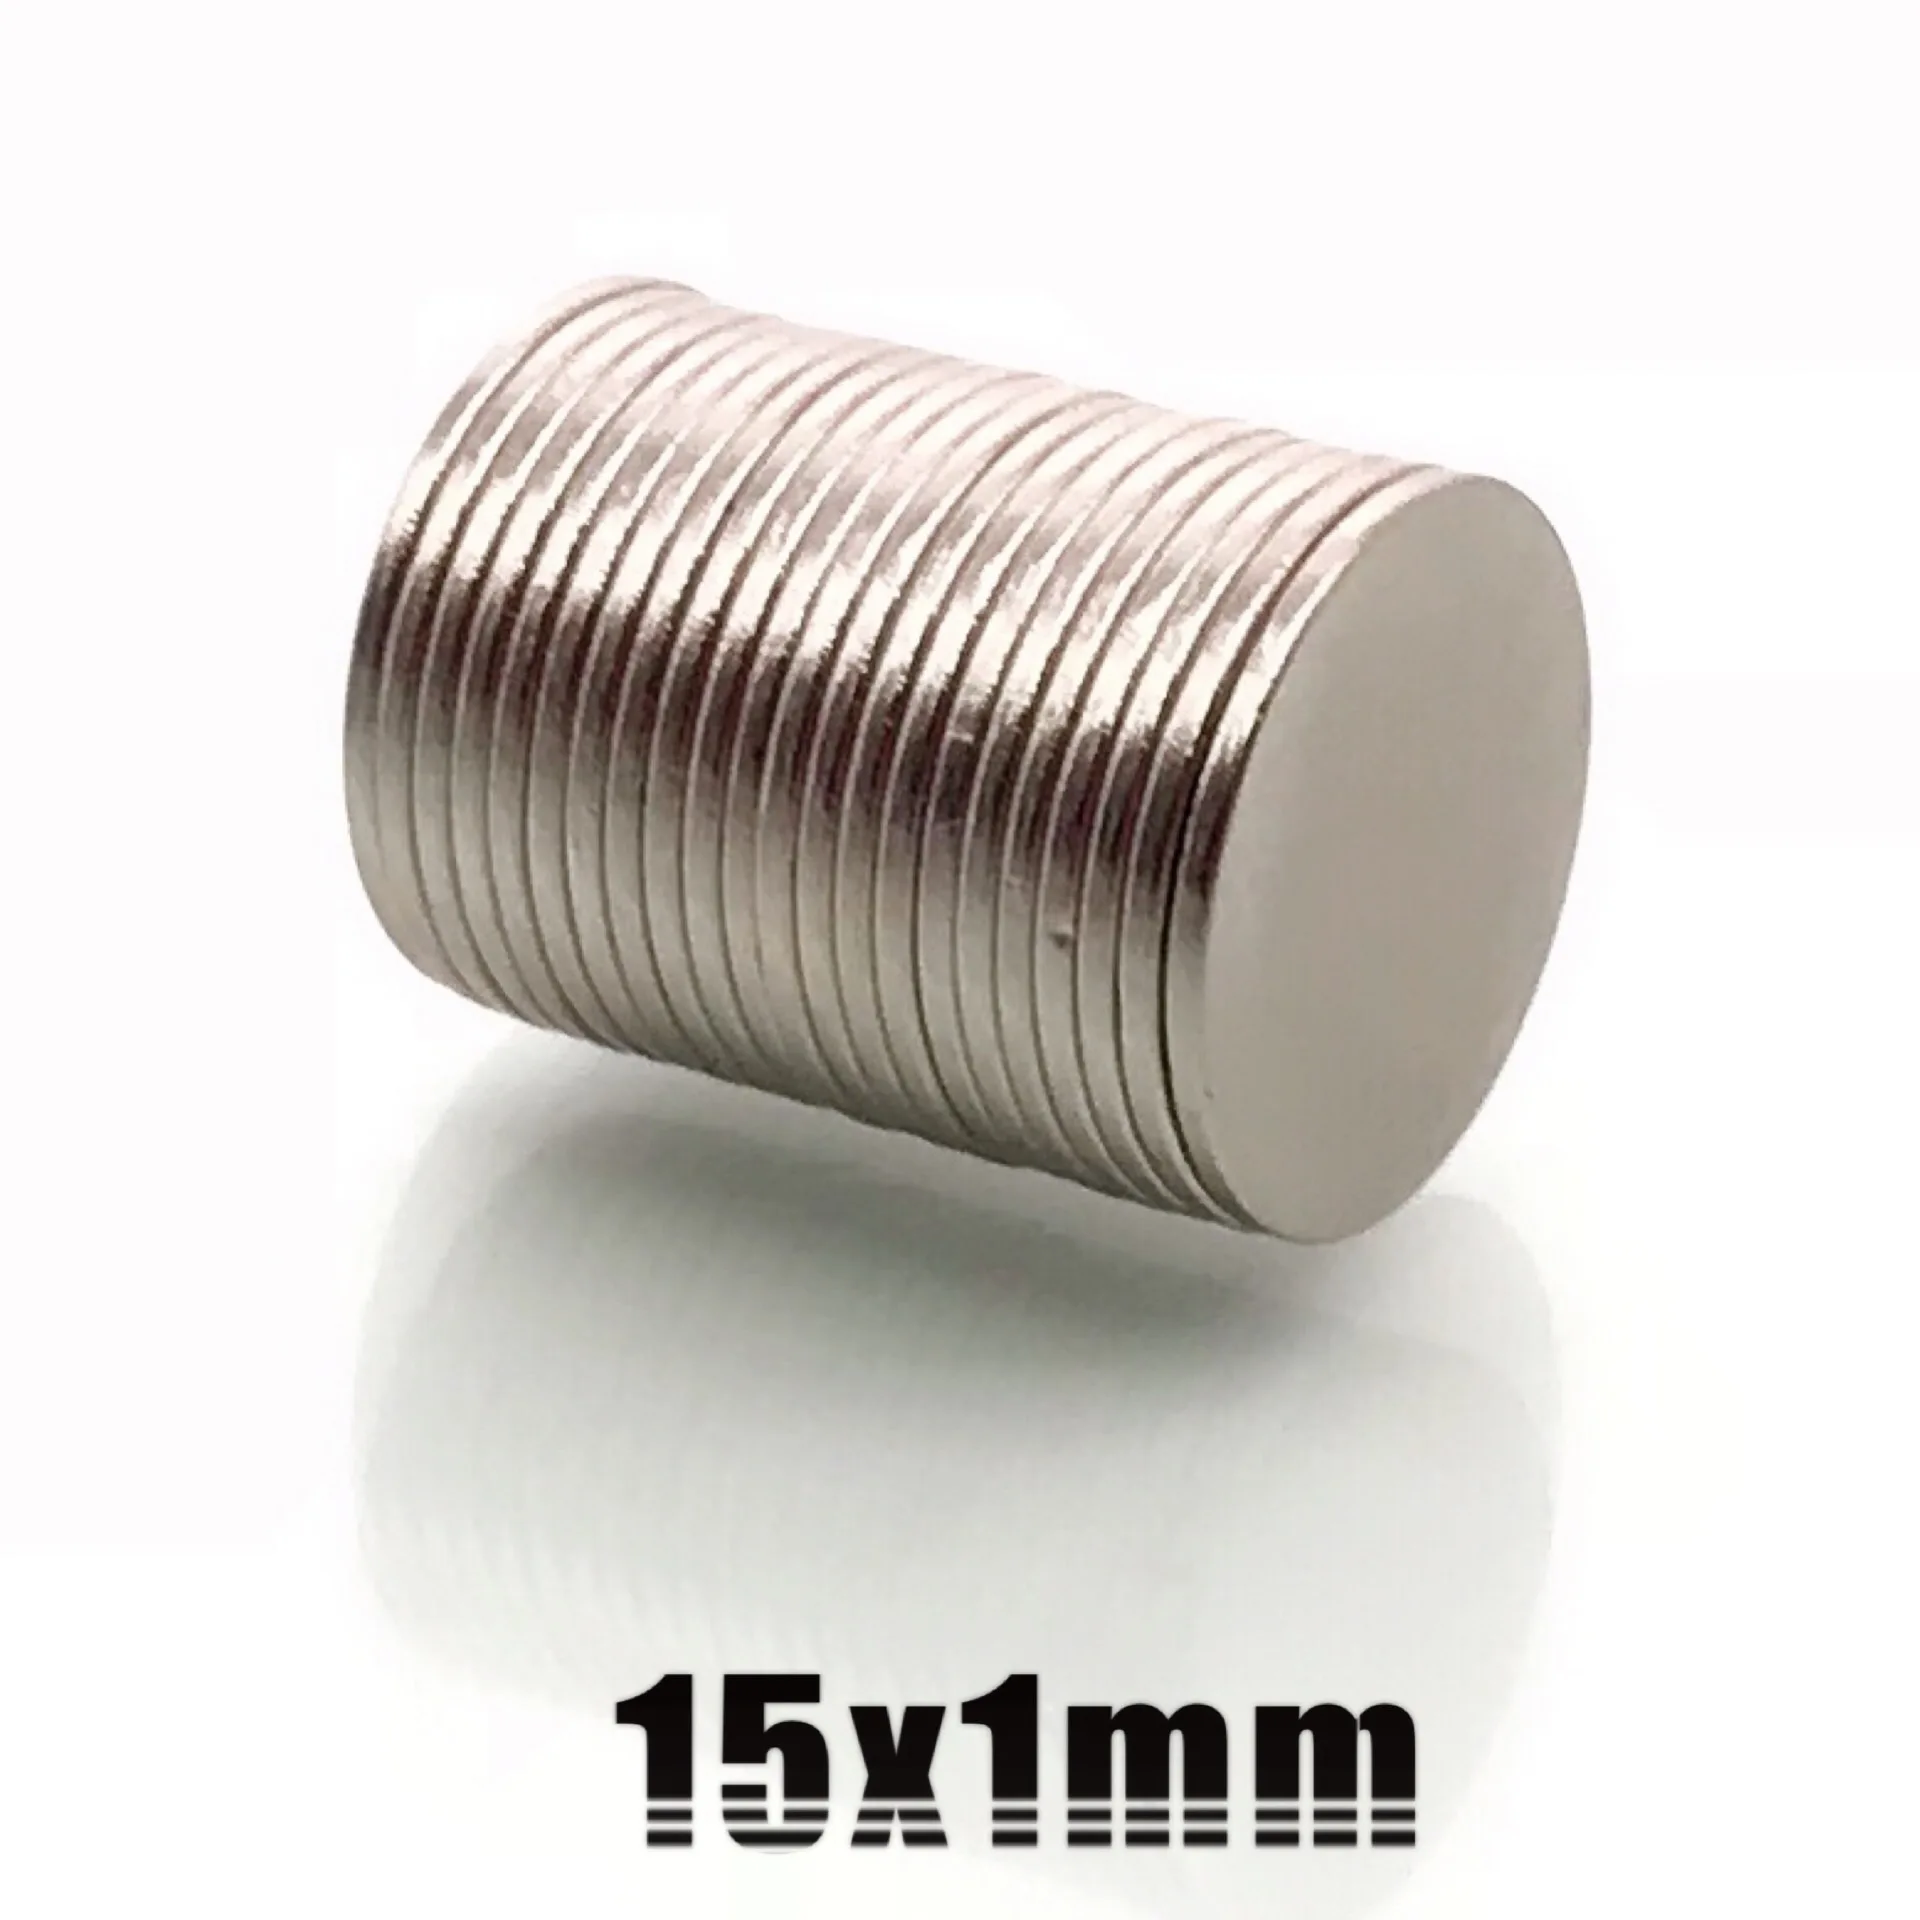 1000 Magnets 10x1 mm Neodymium Disc strong round craft magnet 10mm dia x 1mm 